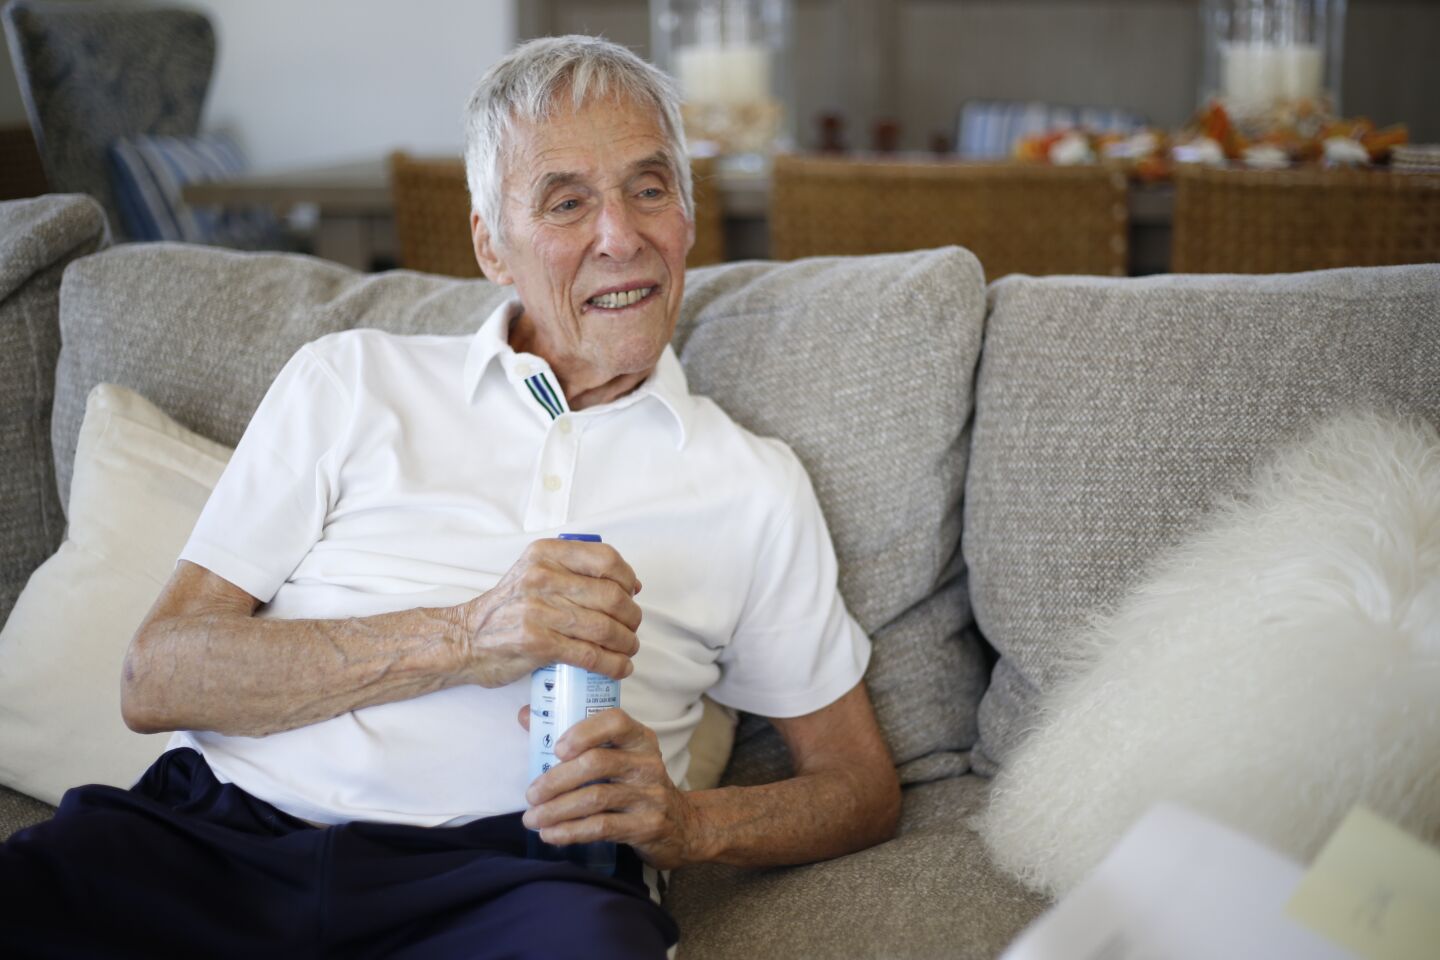 Burt Bacharach sits on a couch holding a water bottle